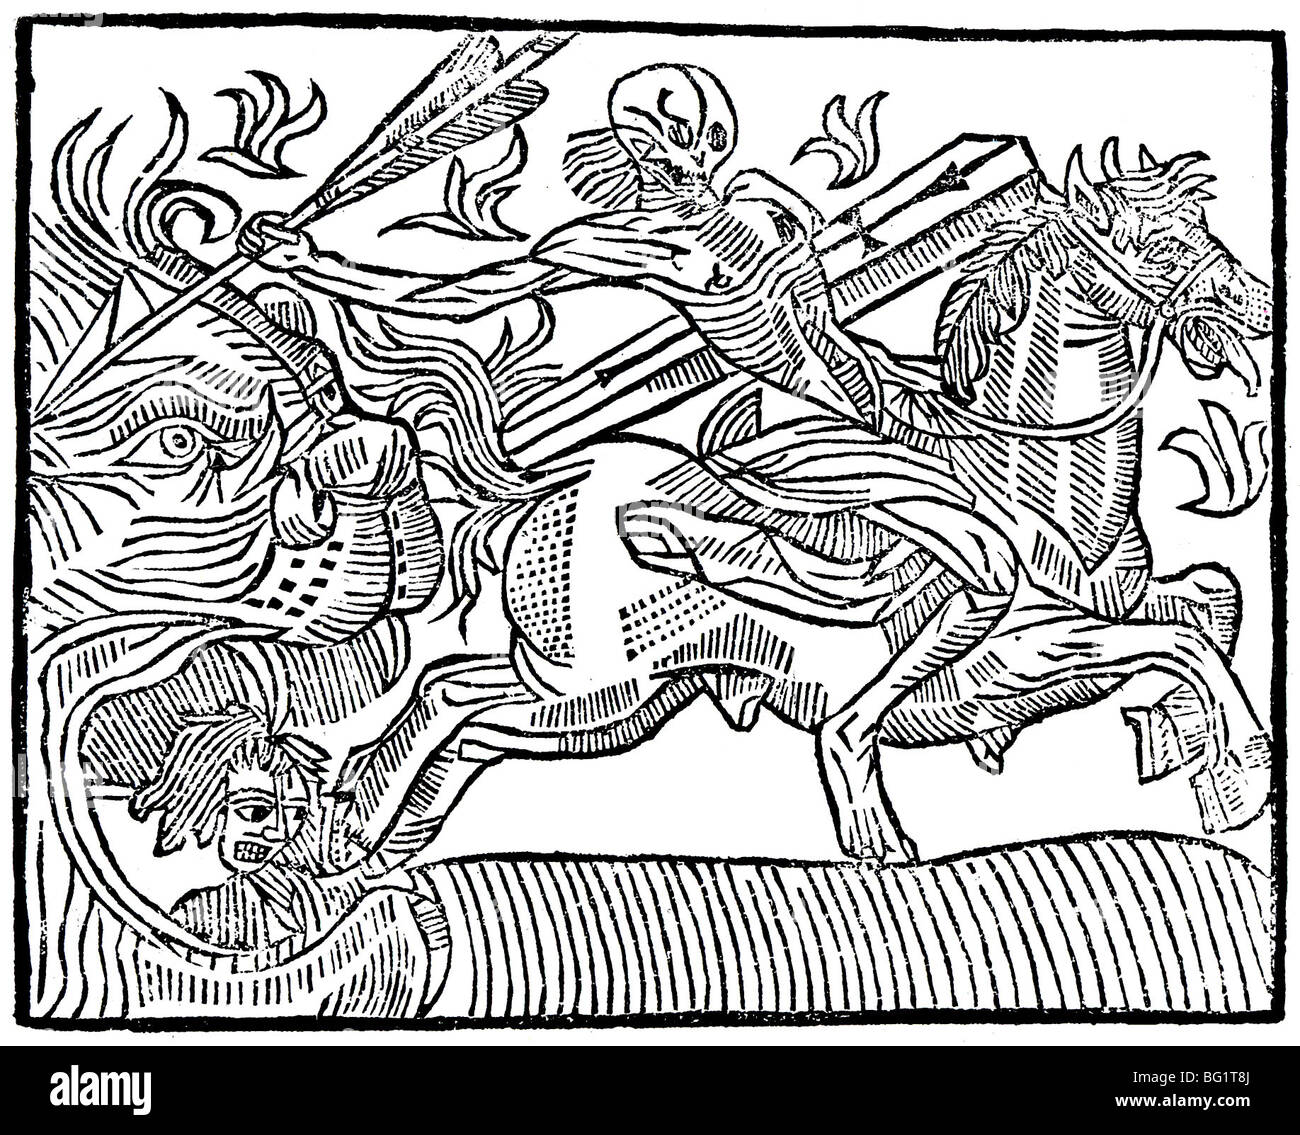 ST ANTHONY'S FIRE !5th century woodcut showing in the form of Death on horseback Stock Photo